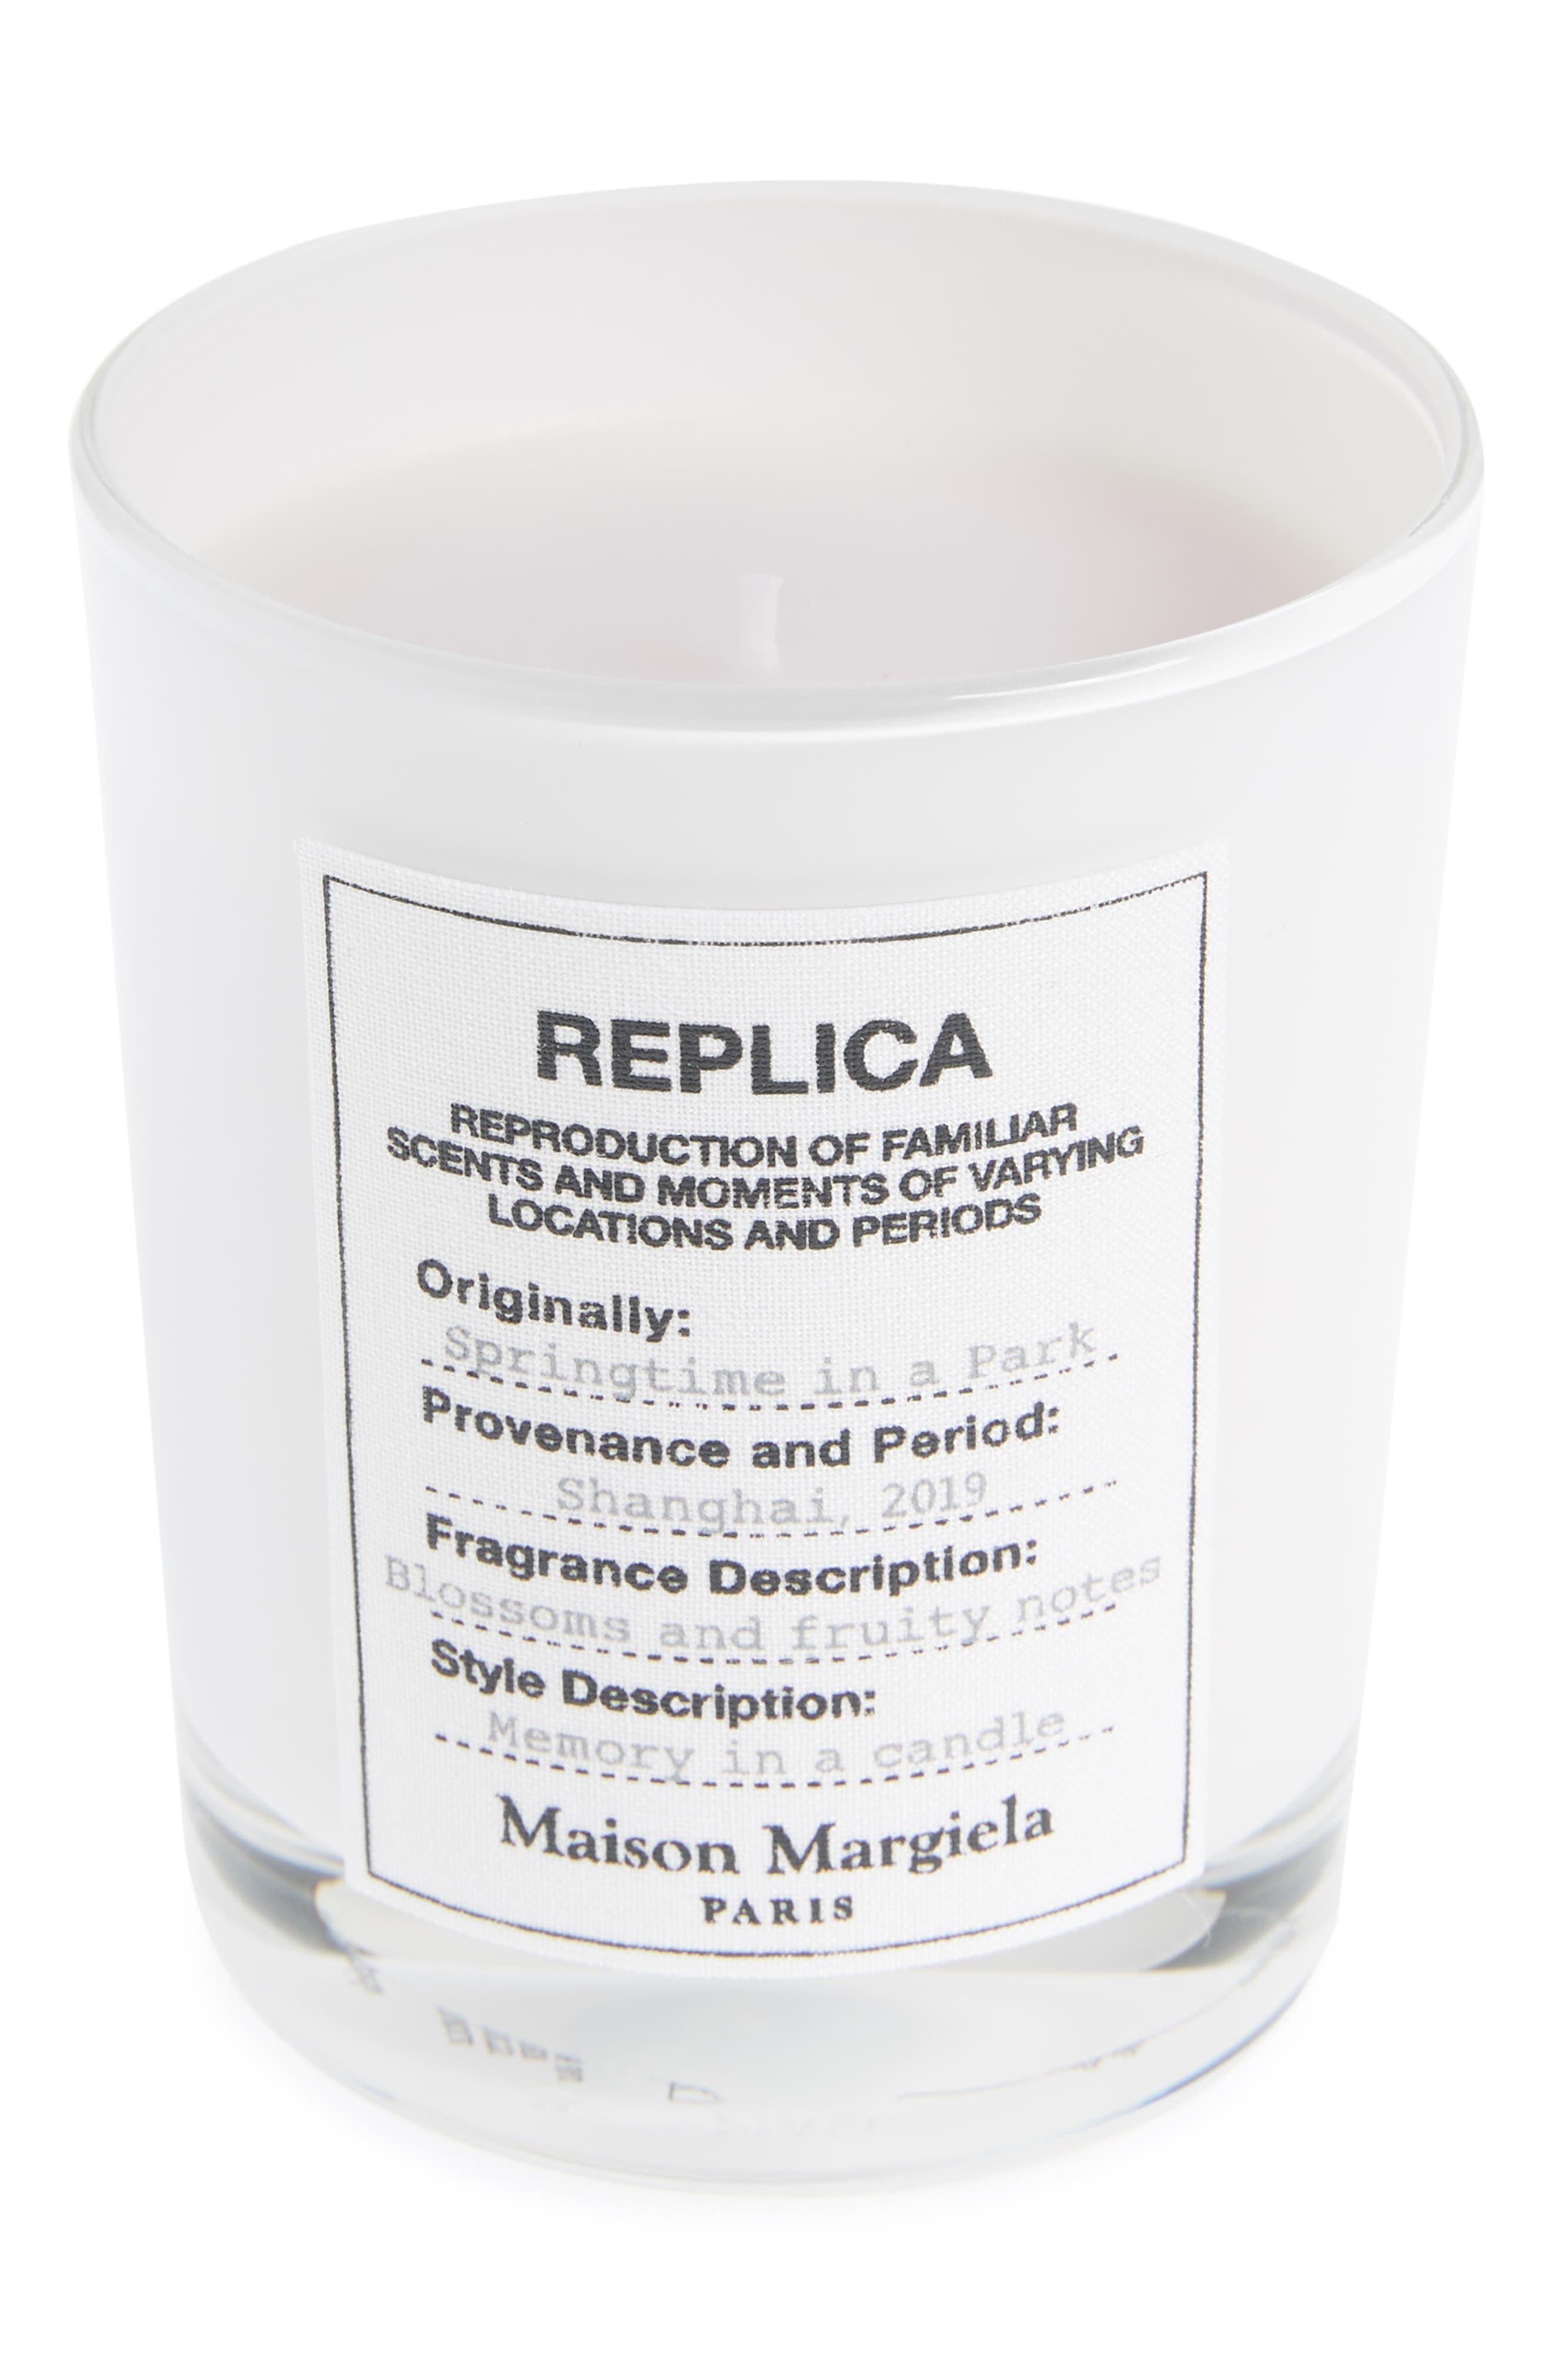 Maison Margiela Replica Springtime In A Park Candle, Size One Size - None